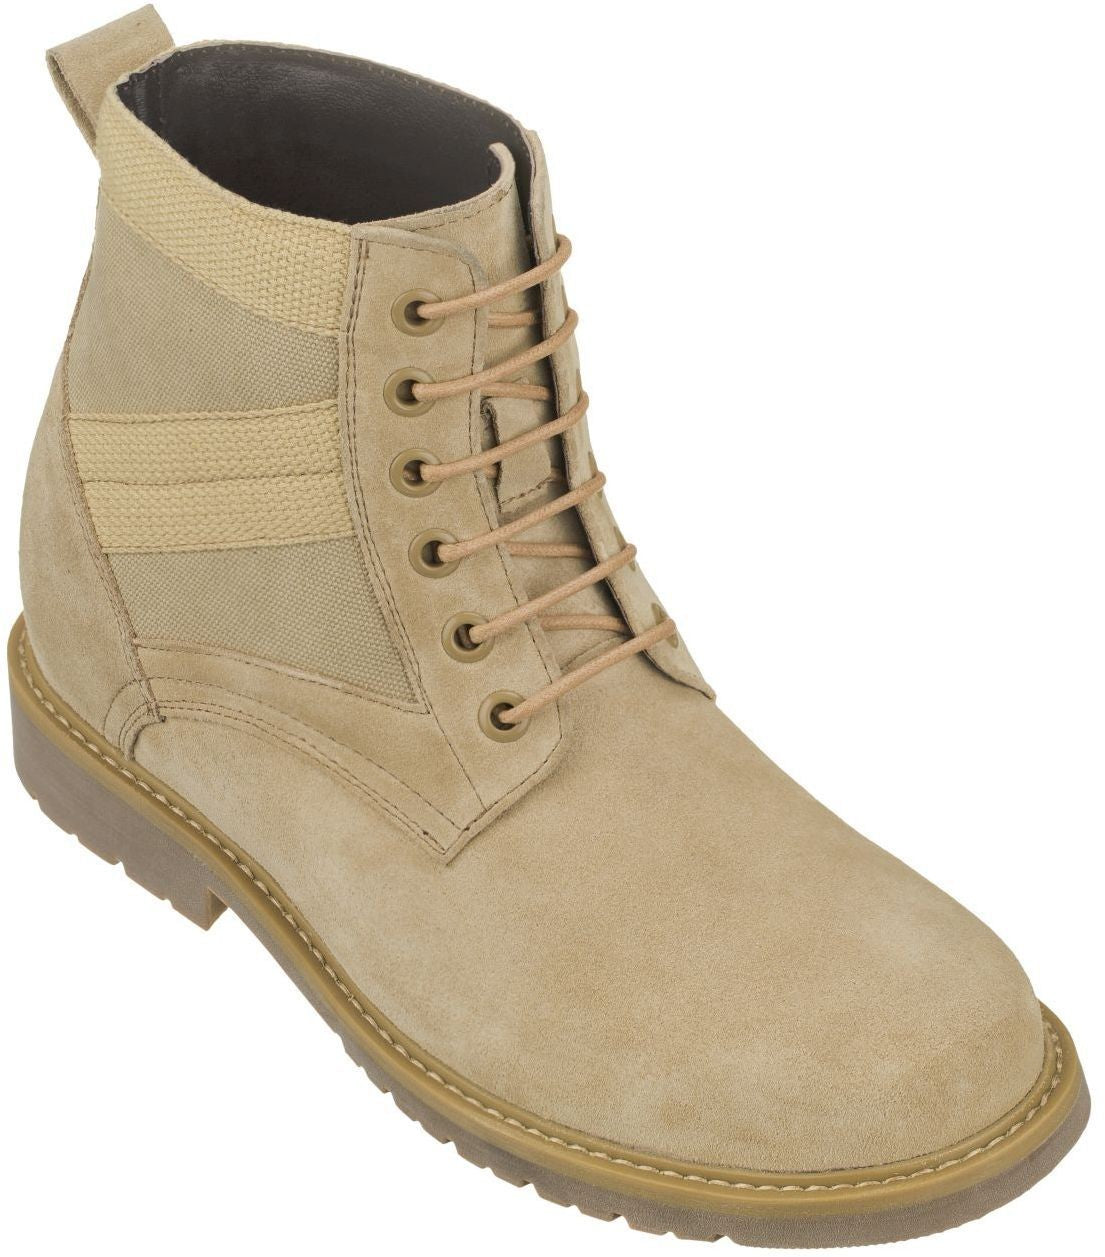 Elevator shoes height increase CALTO - S9012 - 3.2 Inches Taller (Desert Sand)